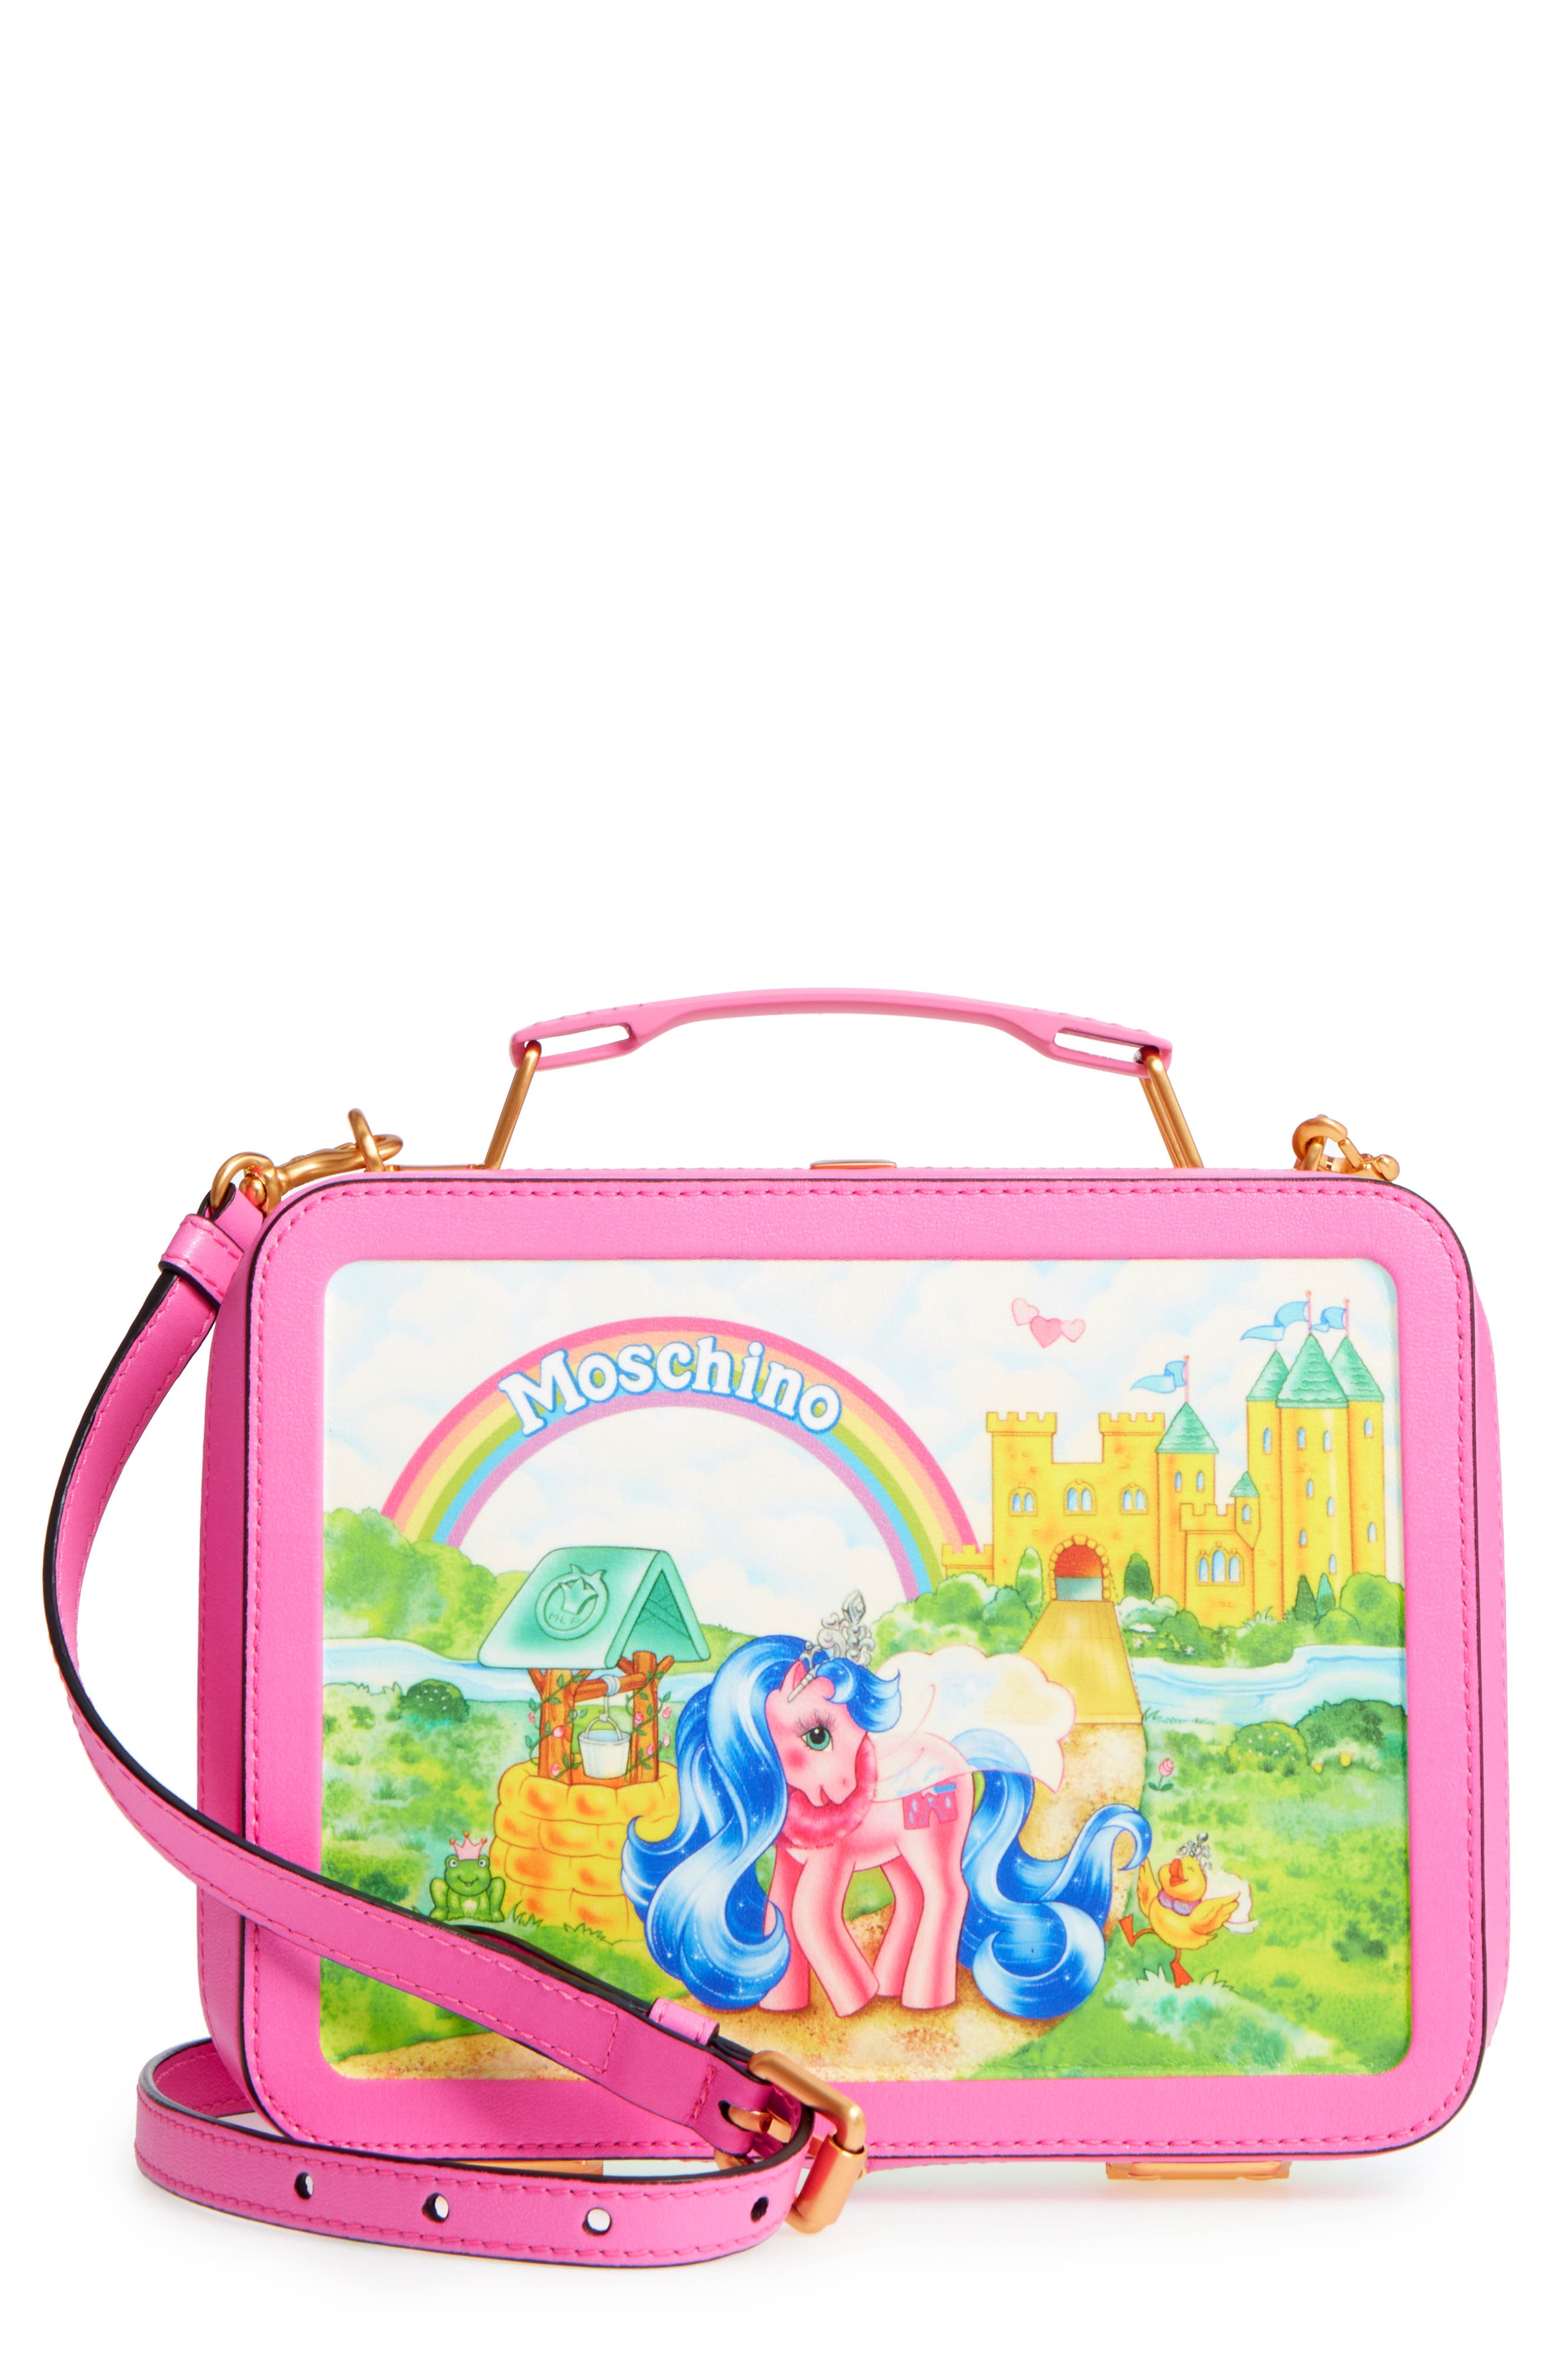 My Little Pony Lunch Box Bag with Shoulder Strap and Water Bottle